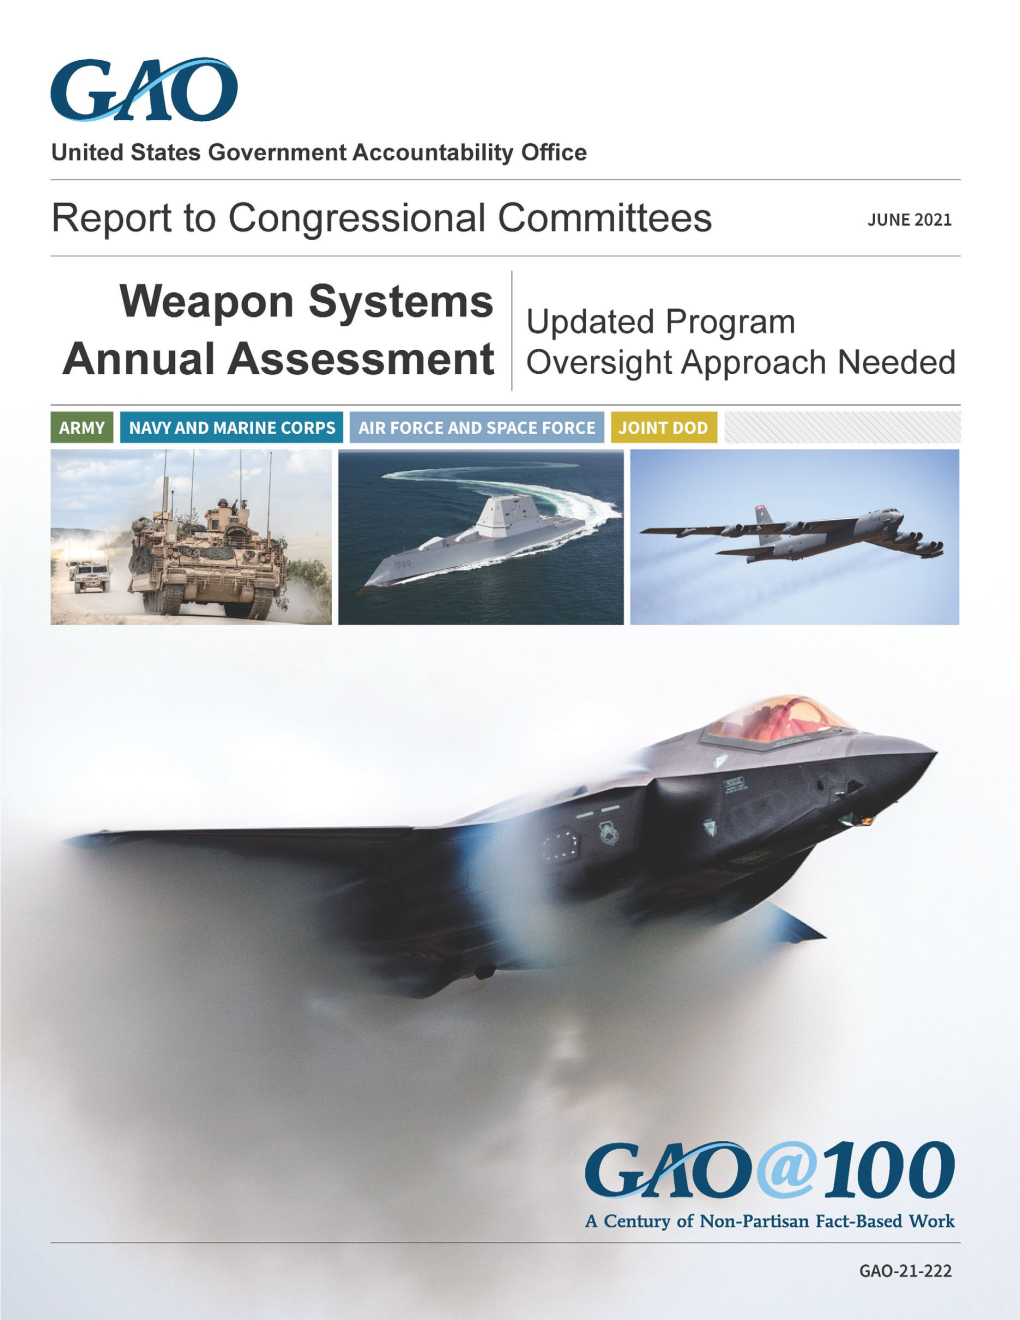 GAO-21-222, Weapon Systems Annual Assessment: Updated Program Oversight Approach Needed